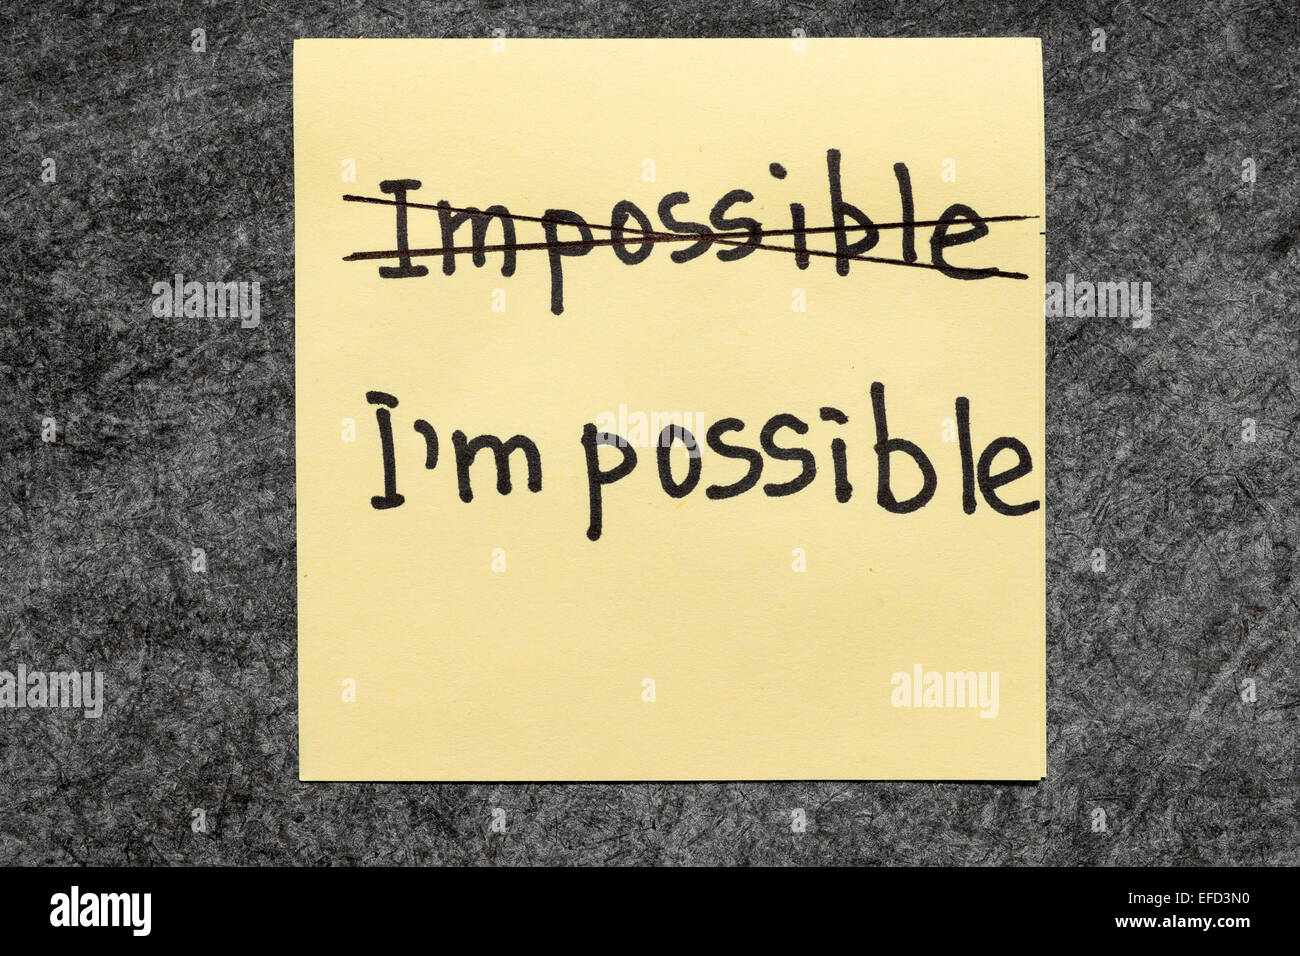 impossible - I am possible concept handwritten on yellow paper note Stock Photo